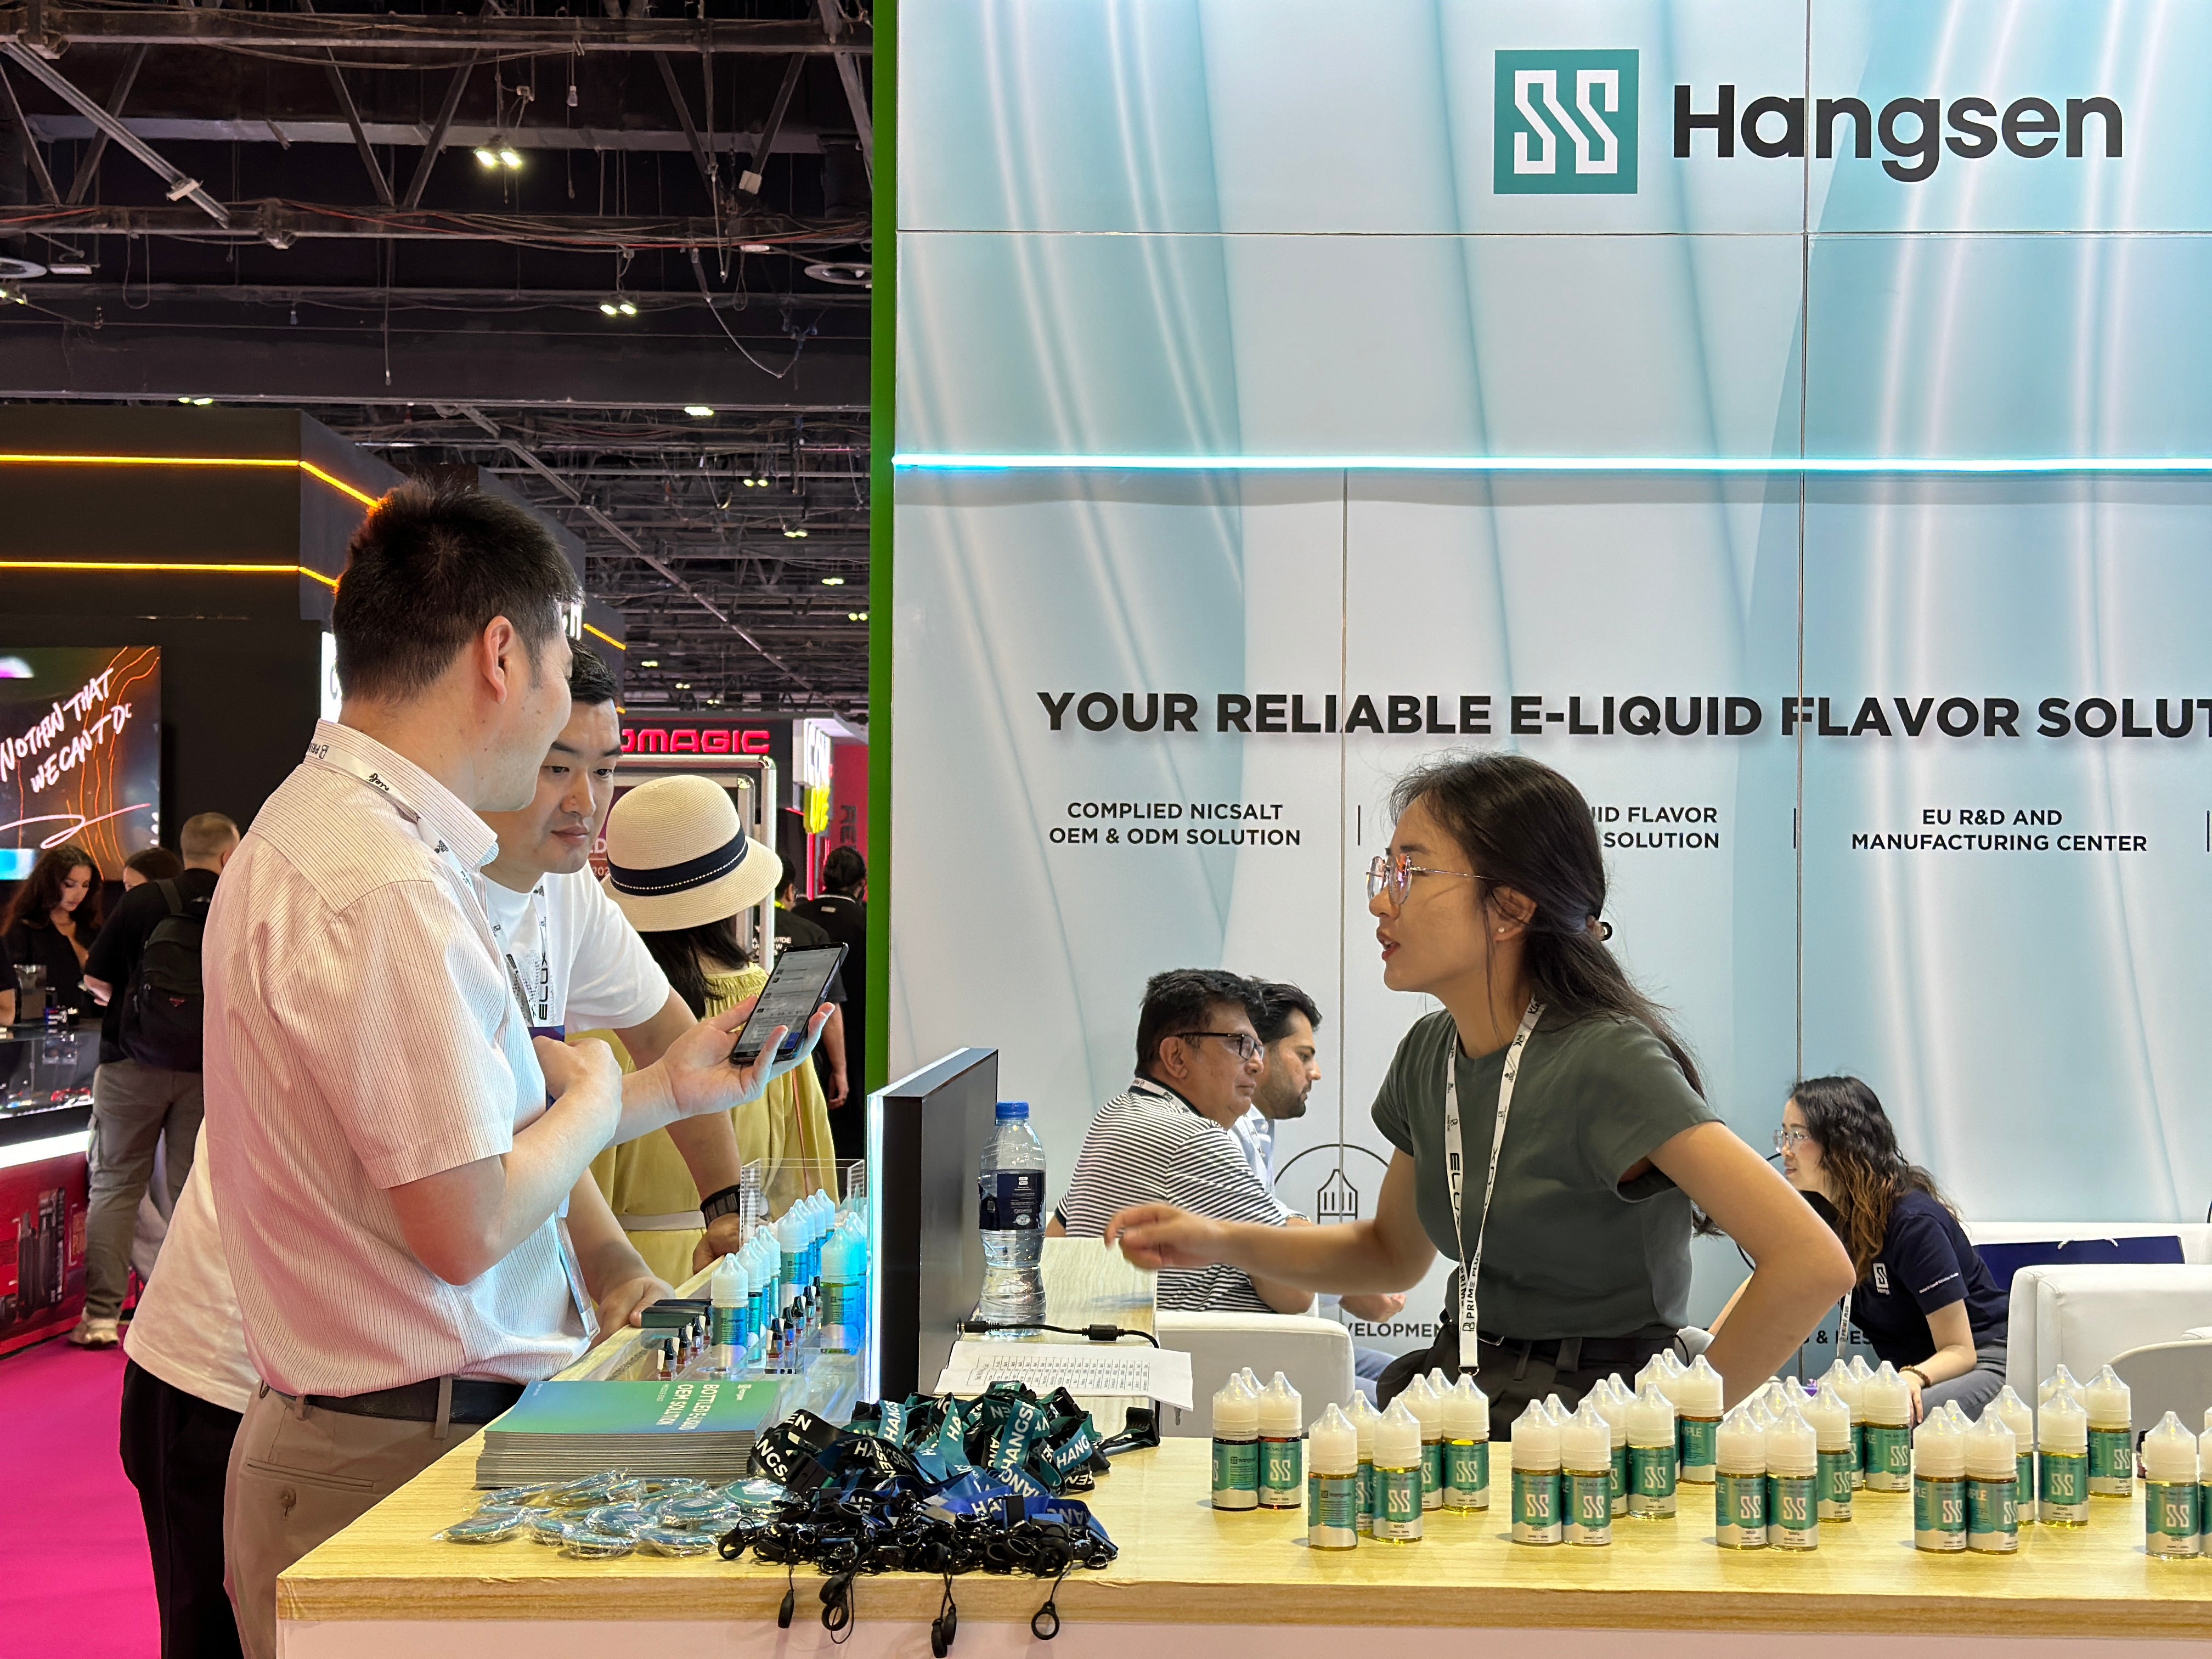 Here is a photo of Hangsen's participation in the World Vape Show,with customers consulting Hangsen's staff in front of Hangsen's booth.